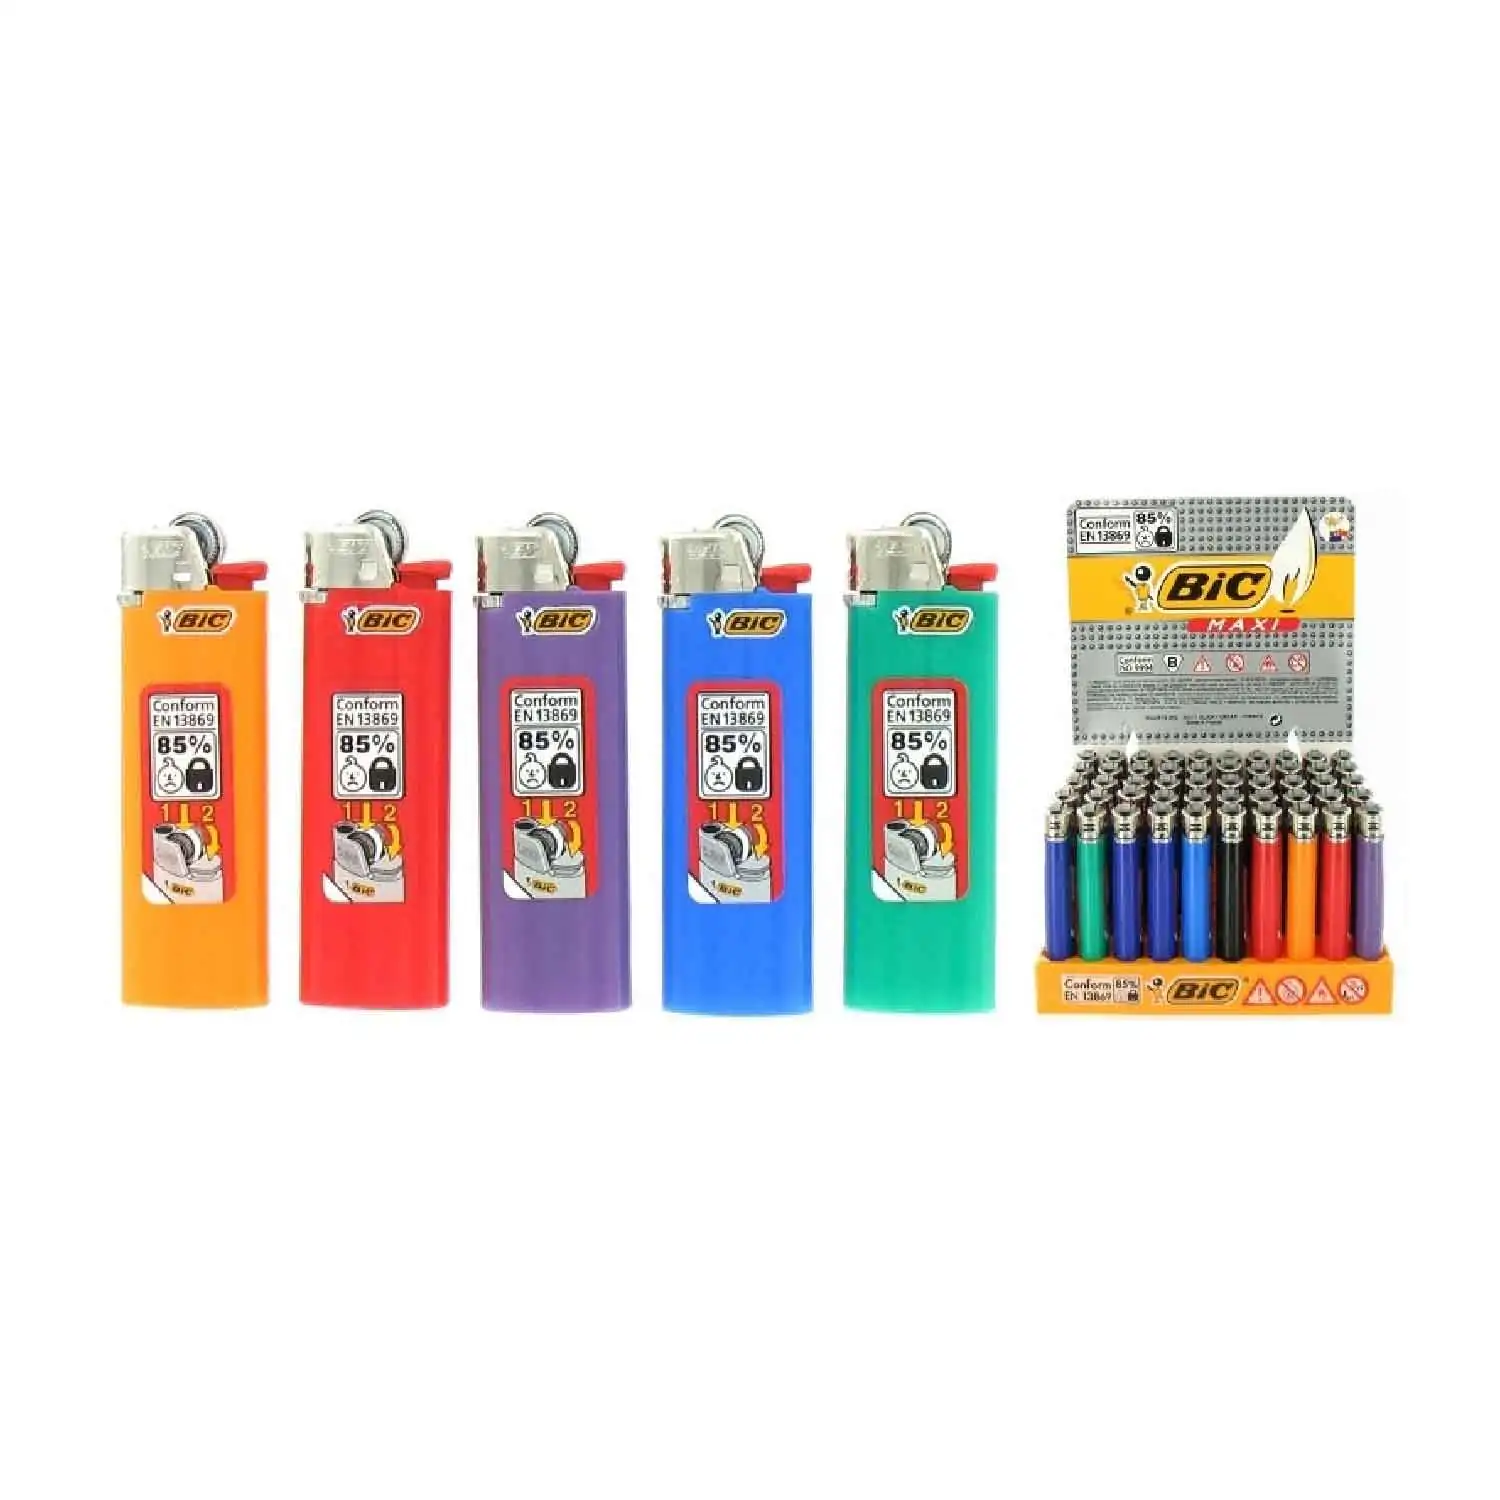 Bic maxi lighter classic - Buy at Real Tobacco